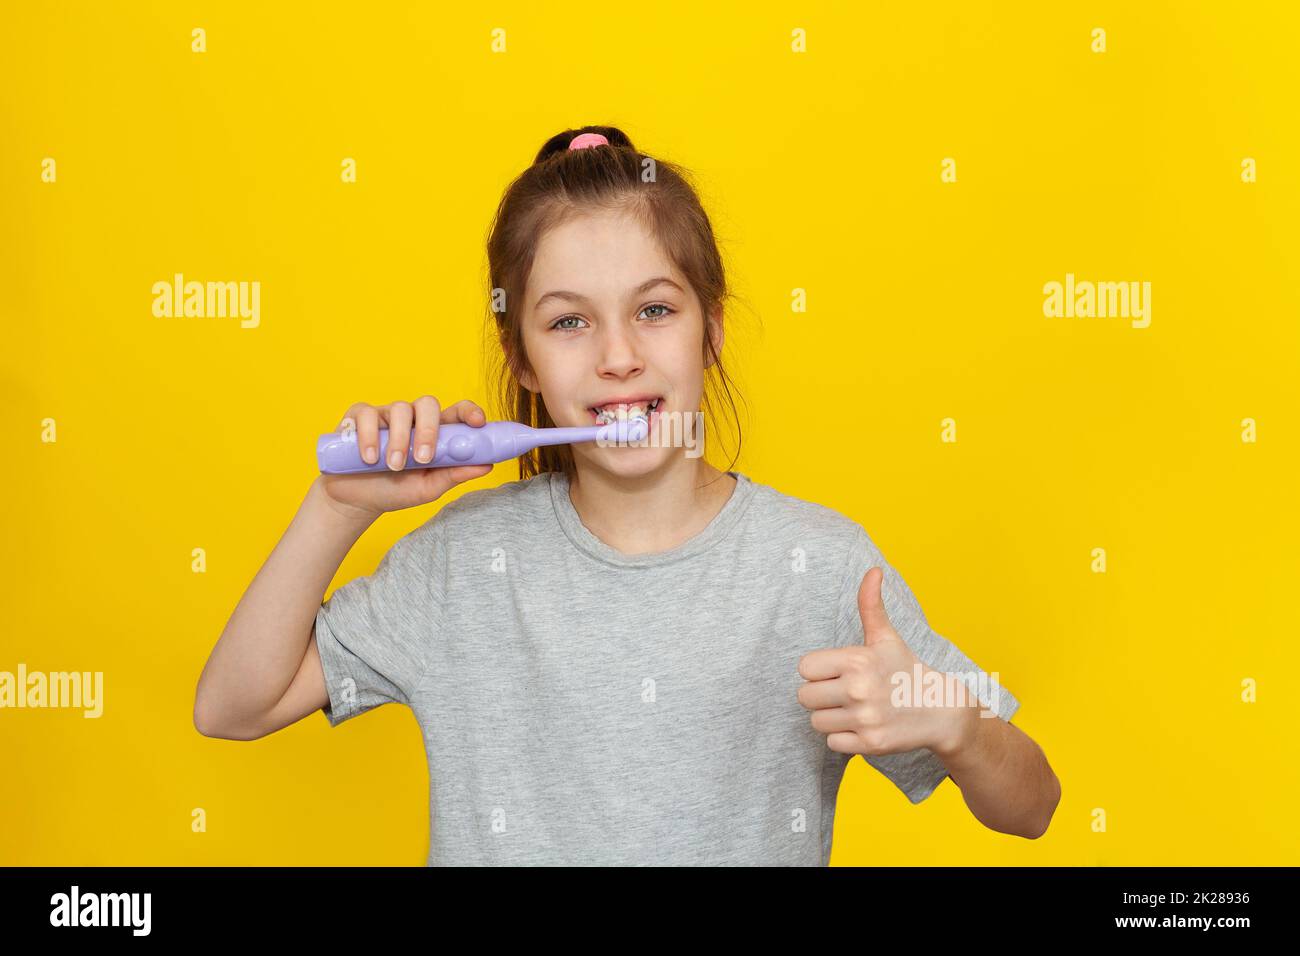 Beautiful brown-haired teenage girl holding brushing her teeth with an electric toothbrush on a yellow background, Children nutrition and oral hygiene concept Stock Photo